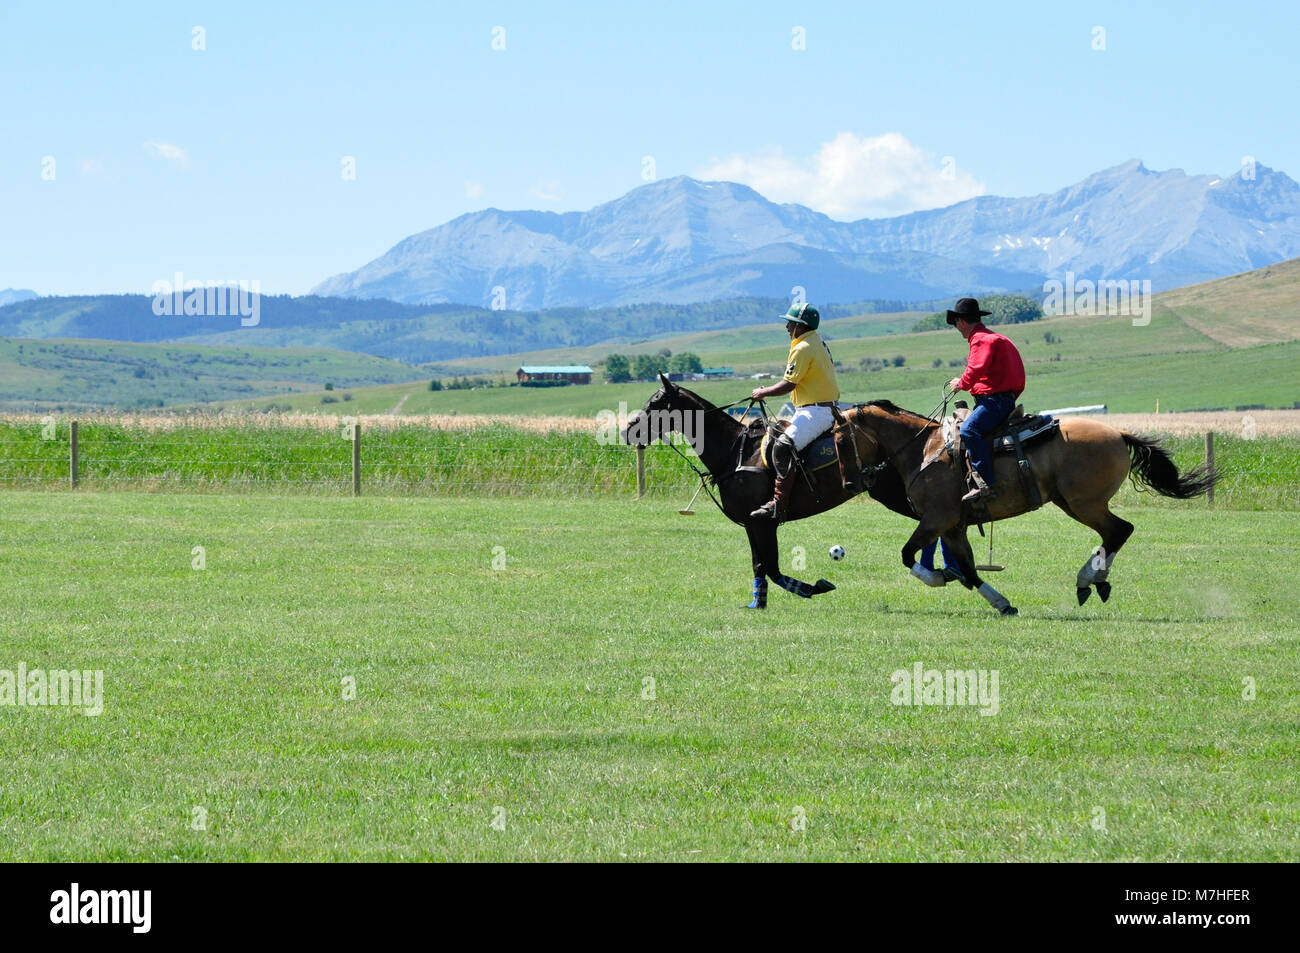 A polo player strikes a ball with a cowboy in hot pursuit during a cowboys versus polo players game at the Historic Bar U Ranch in Longview, Alberta,  Stock Photo